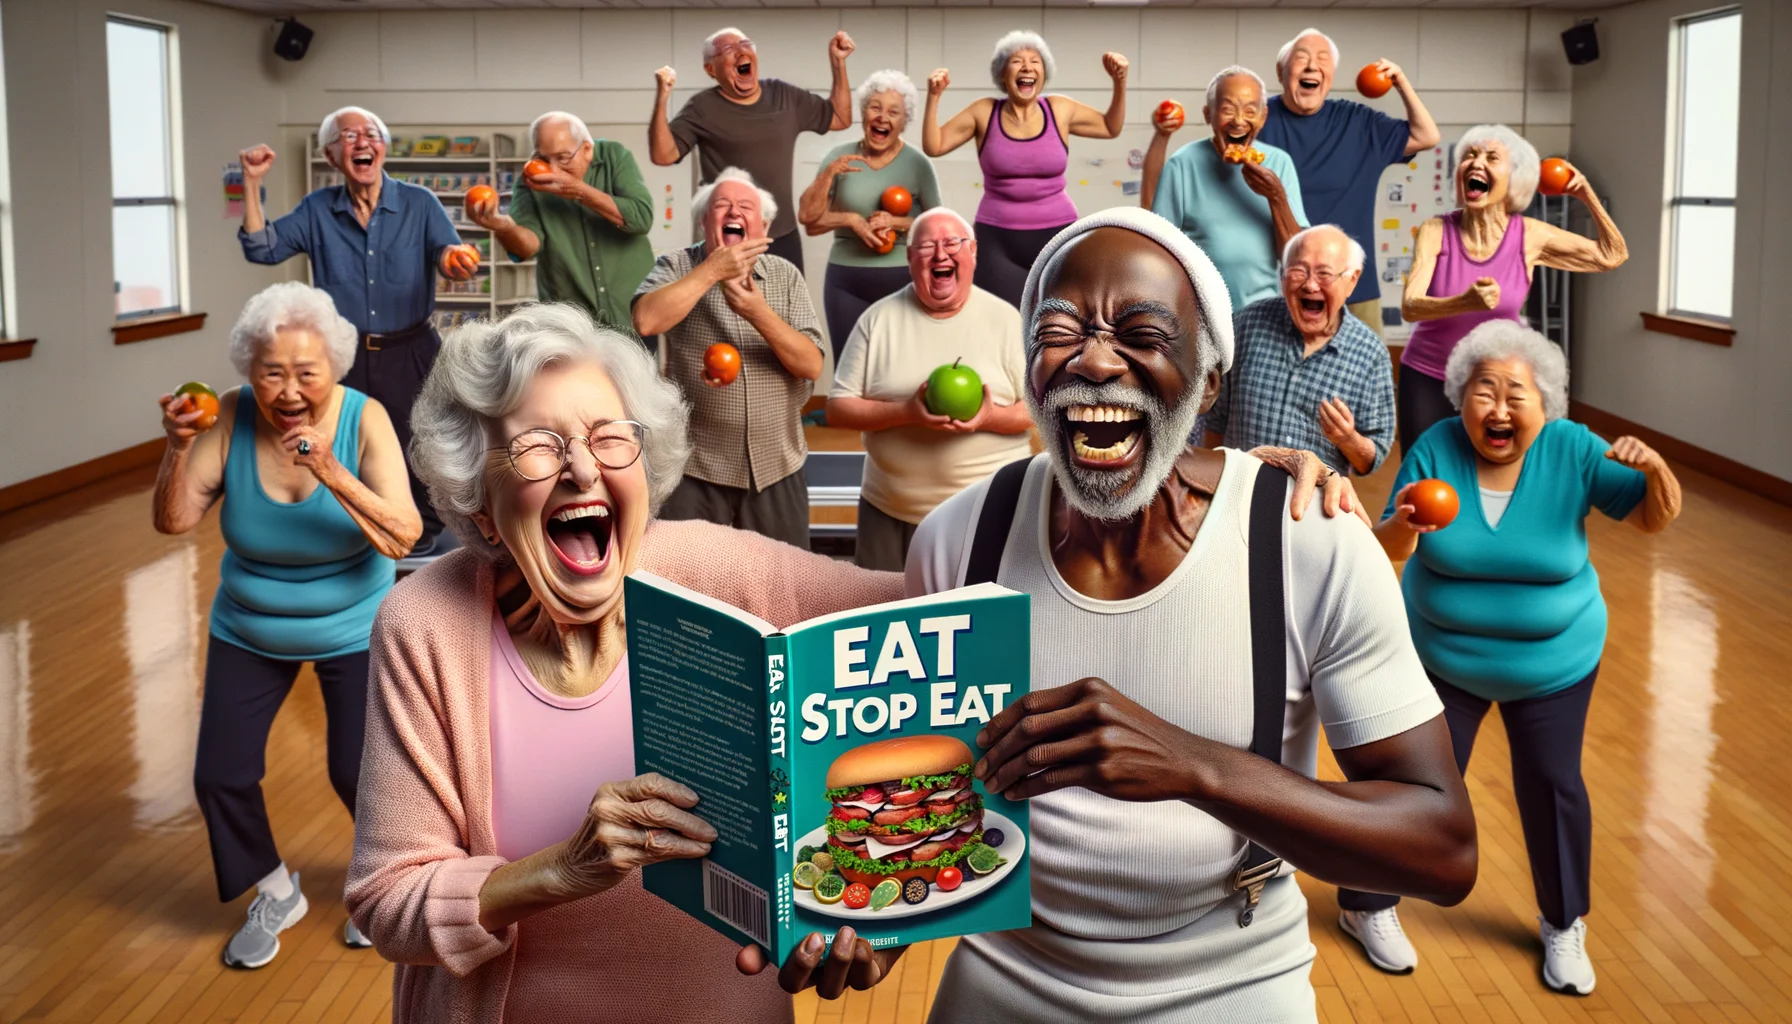 Create a comical scene set in a bustling seniors community center. The focus of the image is the 'eat stop eat' book. Visualize an elderly Caucasian woman and a Black man, both in fitness attire, hysterically laughing while holding up the book and teasing each other about their diet plans. Behind them, a group of diverse seniors - some Hispanic, Middle-Eastern, and South Asian - are engaged in light-hearted antics, such as pretending to snatch food from each other. The room is filled with joy, laughter, and a slight hint of mischief as the seniors share a moment of fun around the diet book.